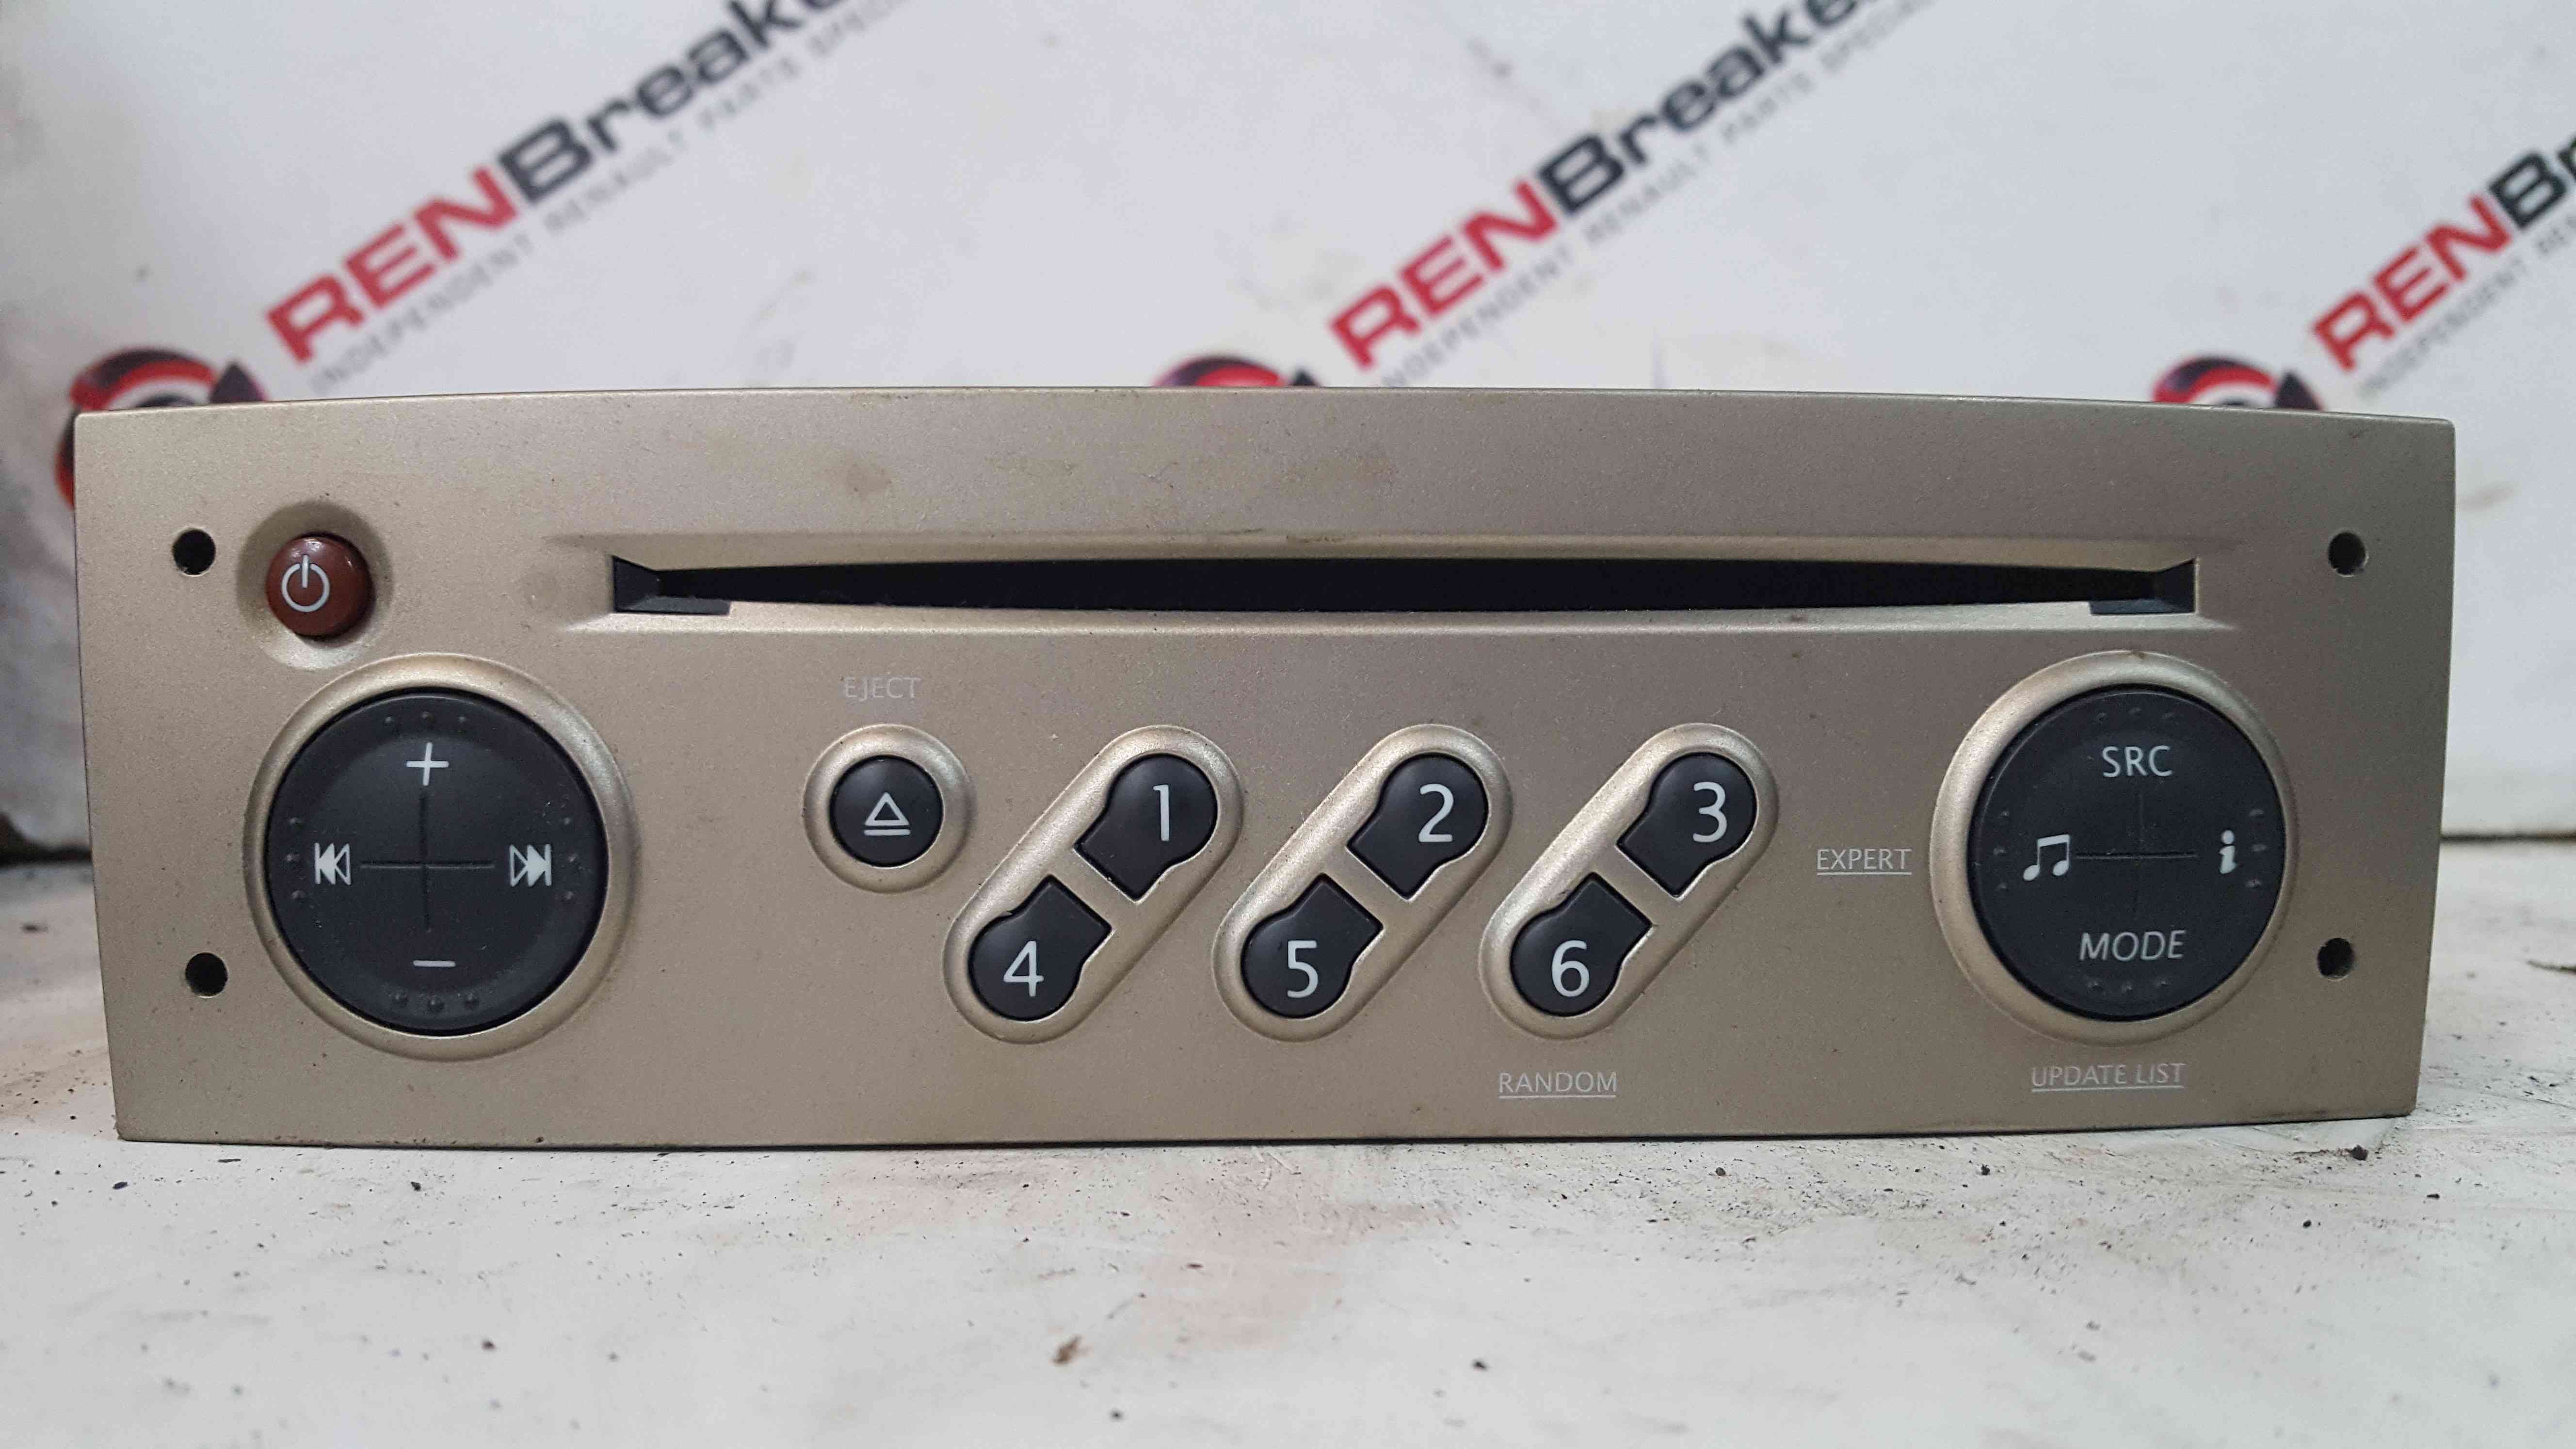 Ministro ballena asentamiento Renault Megane Scenic 2003-2009 Cd Player Radio Update List + Code  8200562687 - Store - Renault Breakers - Used Renault Car Parts & Spares  Specialist